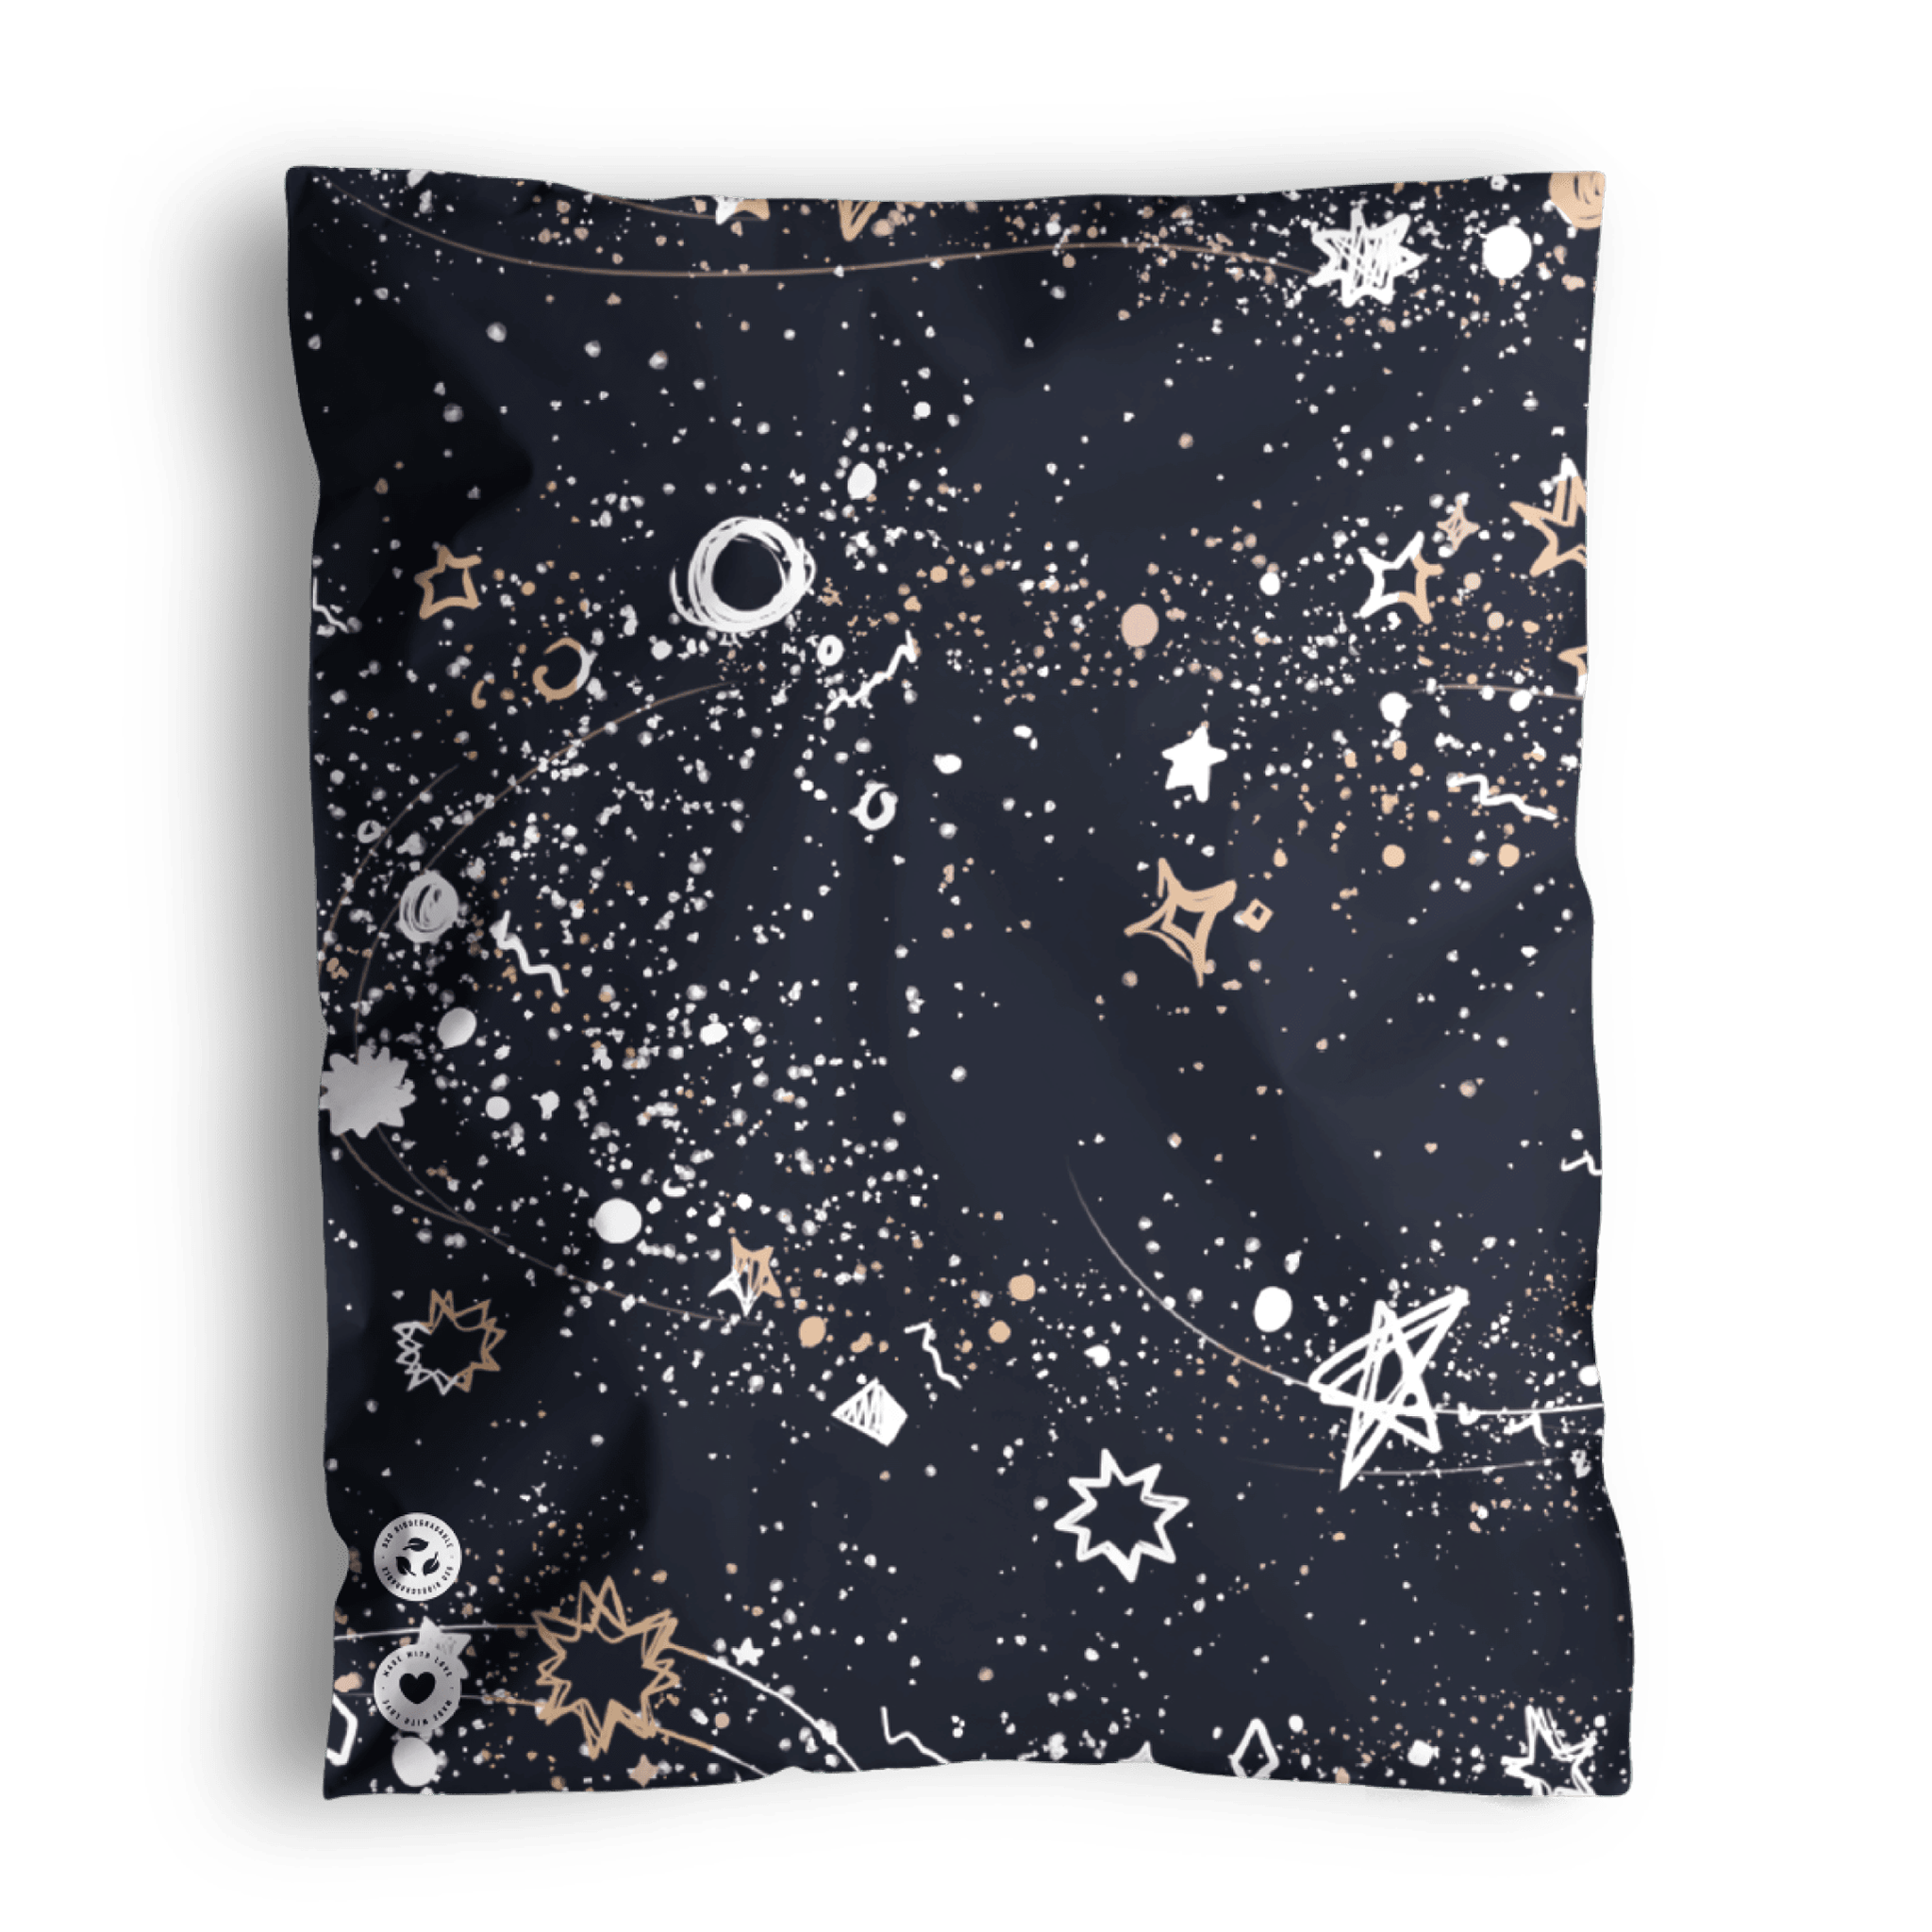 A square pillow with a dark blue background and a decorative pattern featuring stars, planets, and speckles in white and gold tones, packaged in impack.co Midnight Galaxy Mailers 14.5" x 19